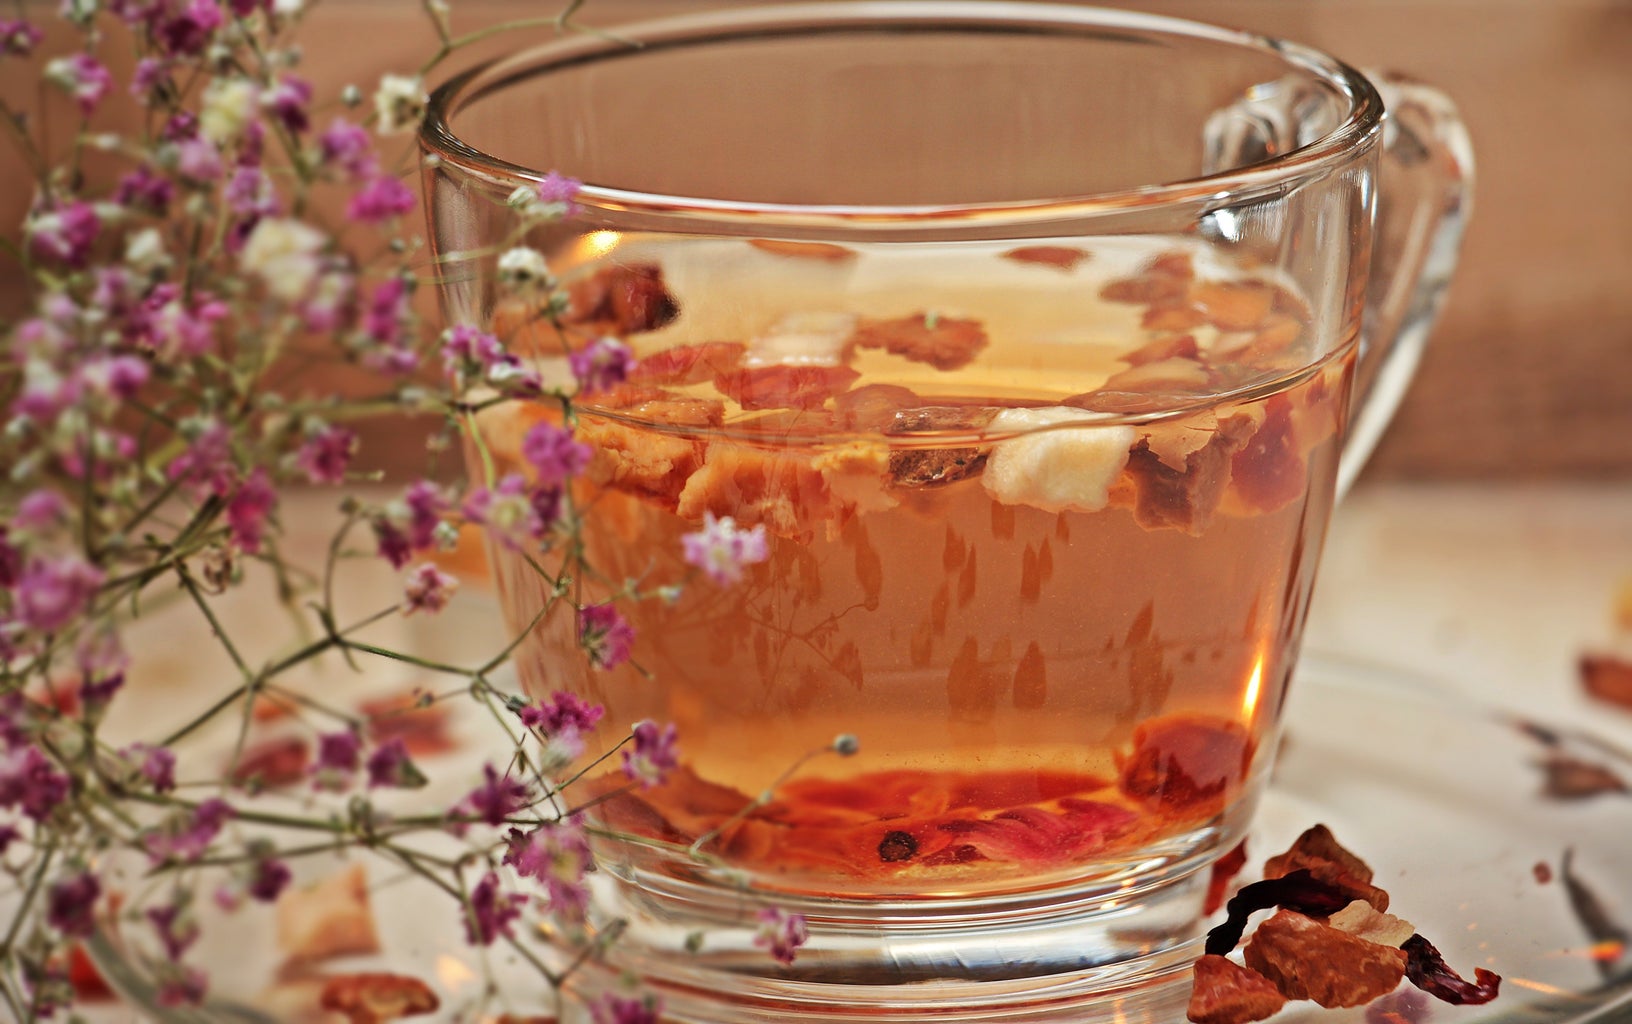 Breakfast tea with flowers and strawberries